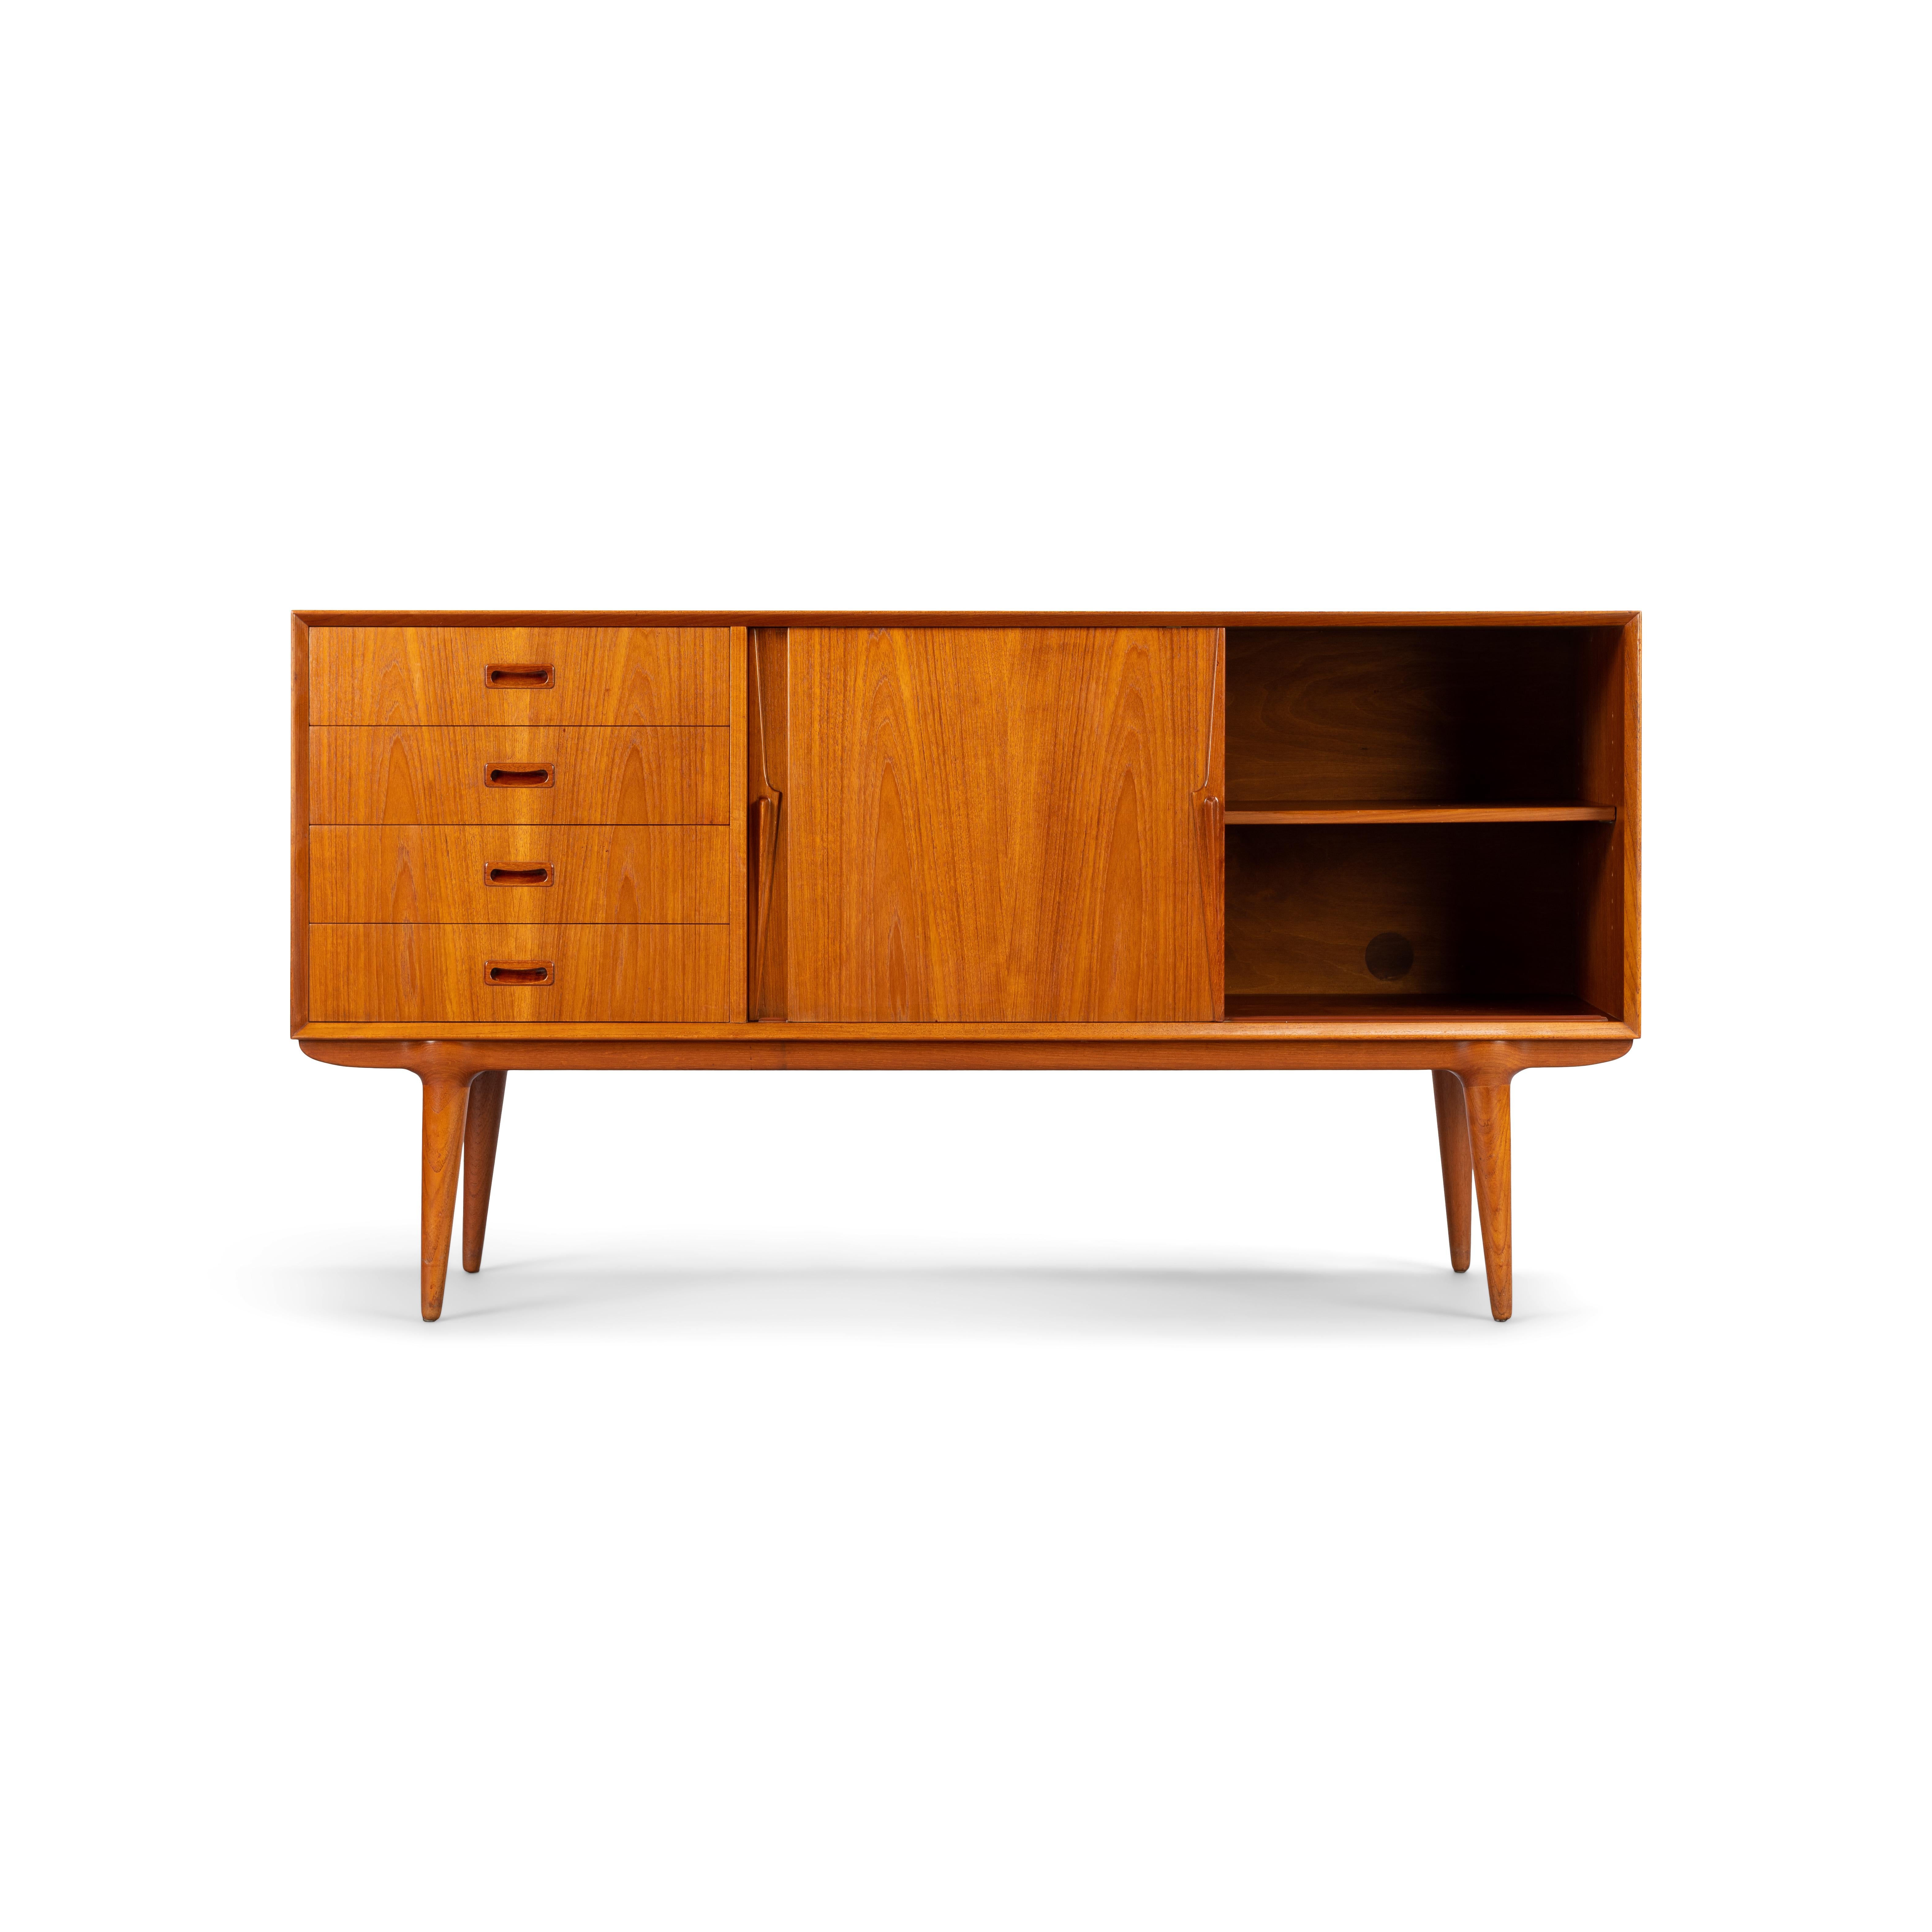 A Classic among credenza's, this teak model #12 credenza designed by Gunni Omann for Omann Jun Møbelfabrik. Recognisable design features and perfectly proportioned, with a raised height of 85cm, this piece will work well with any modern decor.